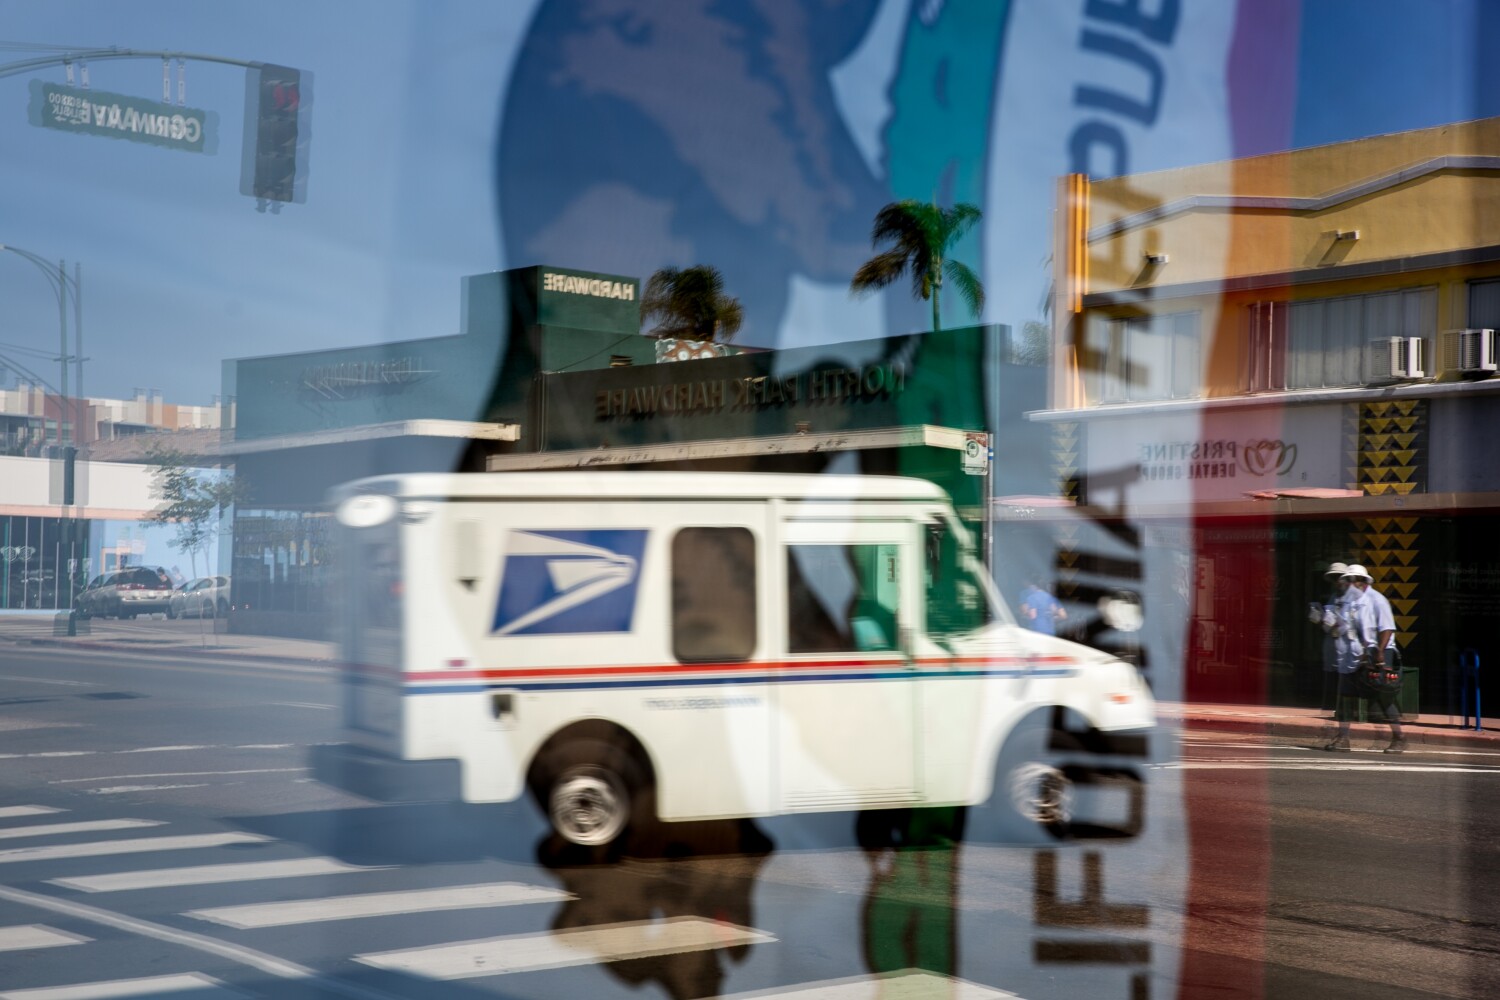 Two postal workers charged with COVID-19 unemployment fraud